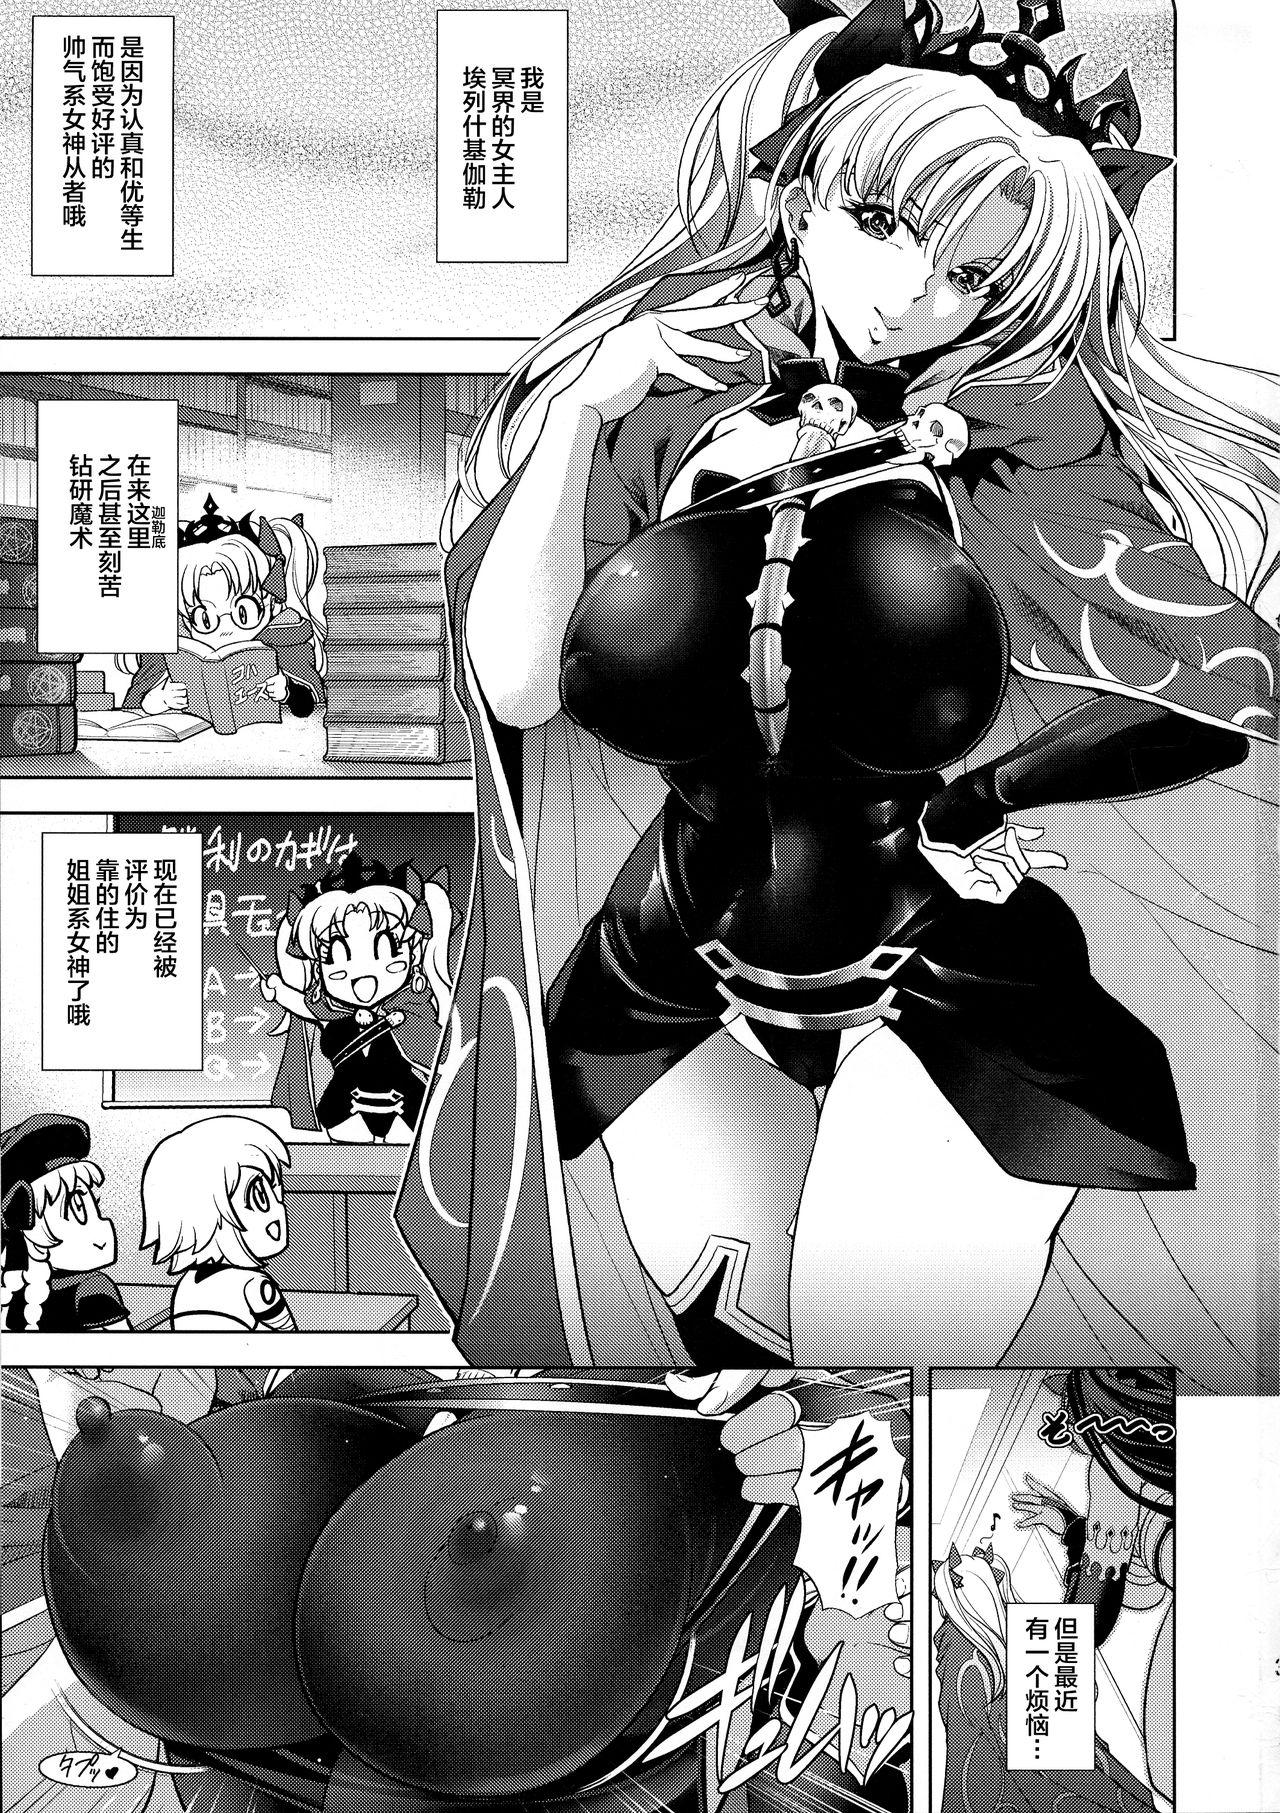 Dildo Fucking COMMAND CODE - Fate grand order Perverted - Page 2